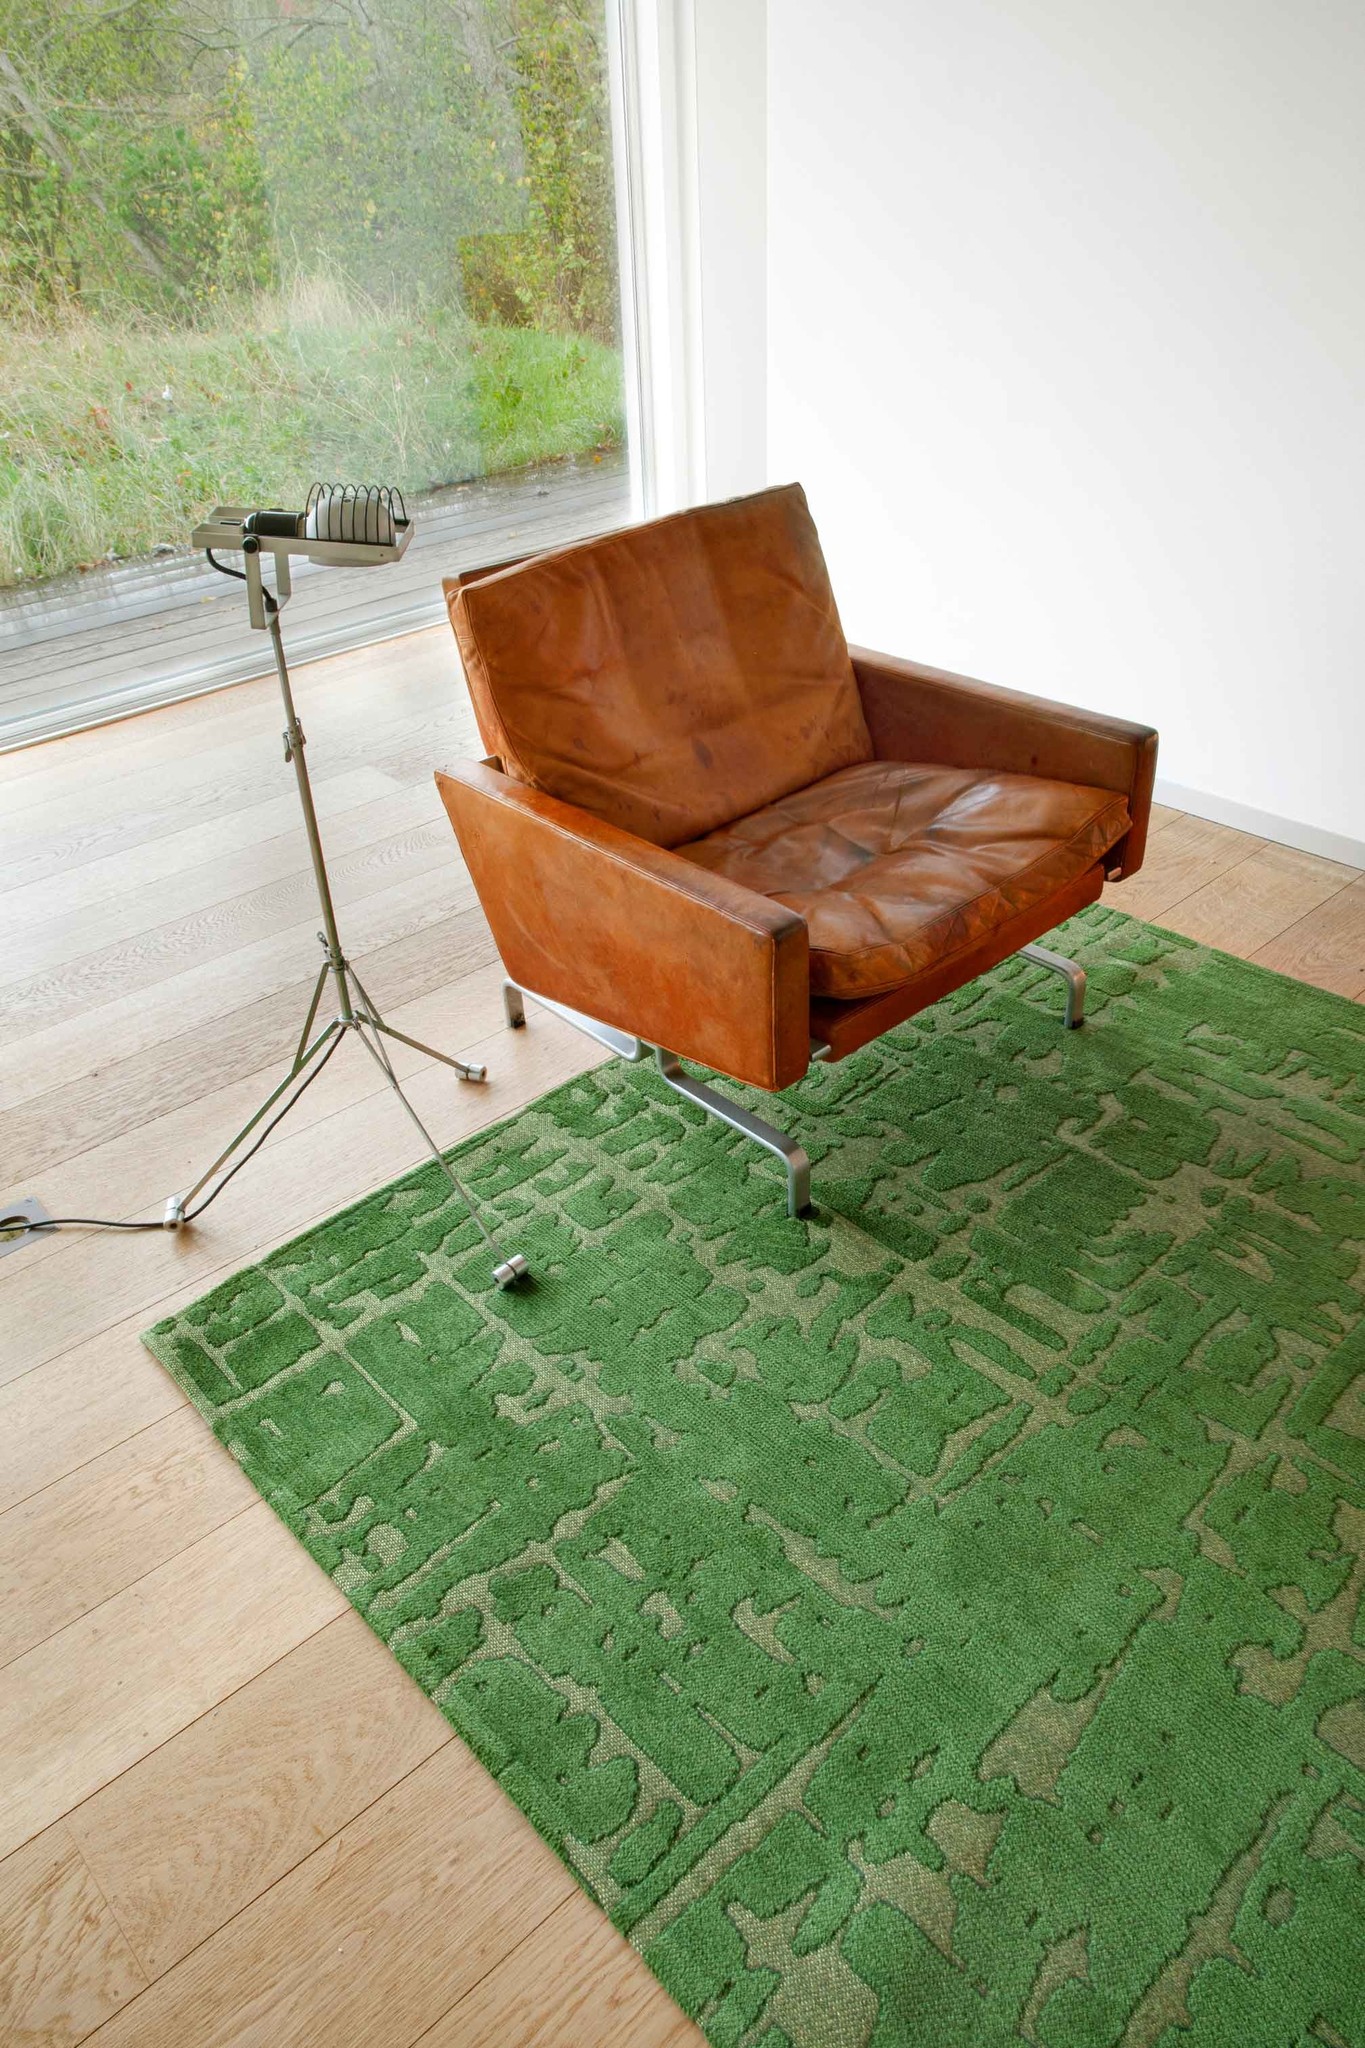 Abstract Green Belgian Rug ☞ Size: 9' 2" x 13' (280 x 390 cm)